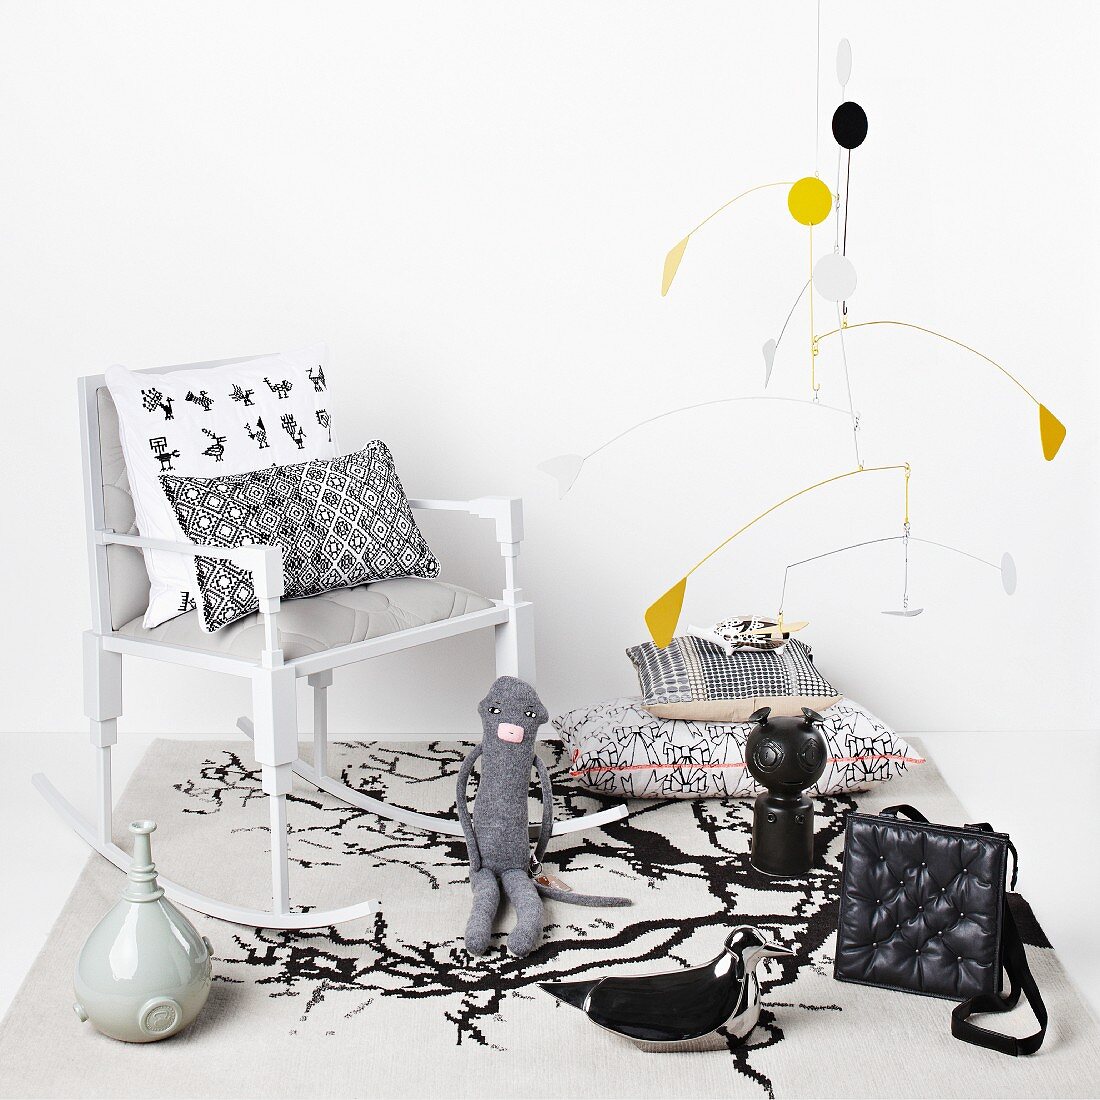 Mobile by Alexander Calder above collection of various figurines, cushions and delicate rocking chair